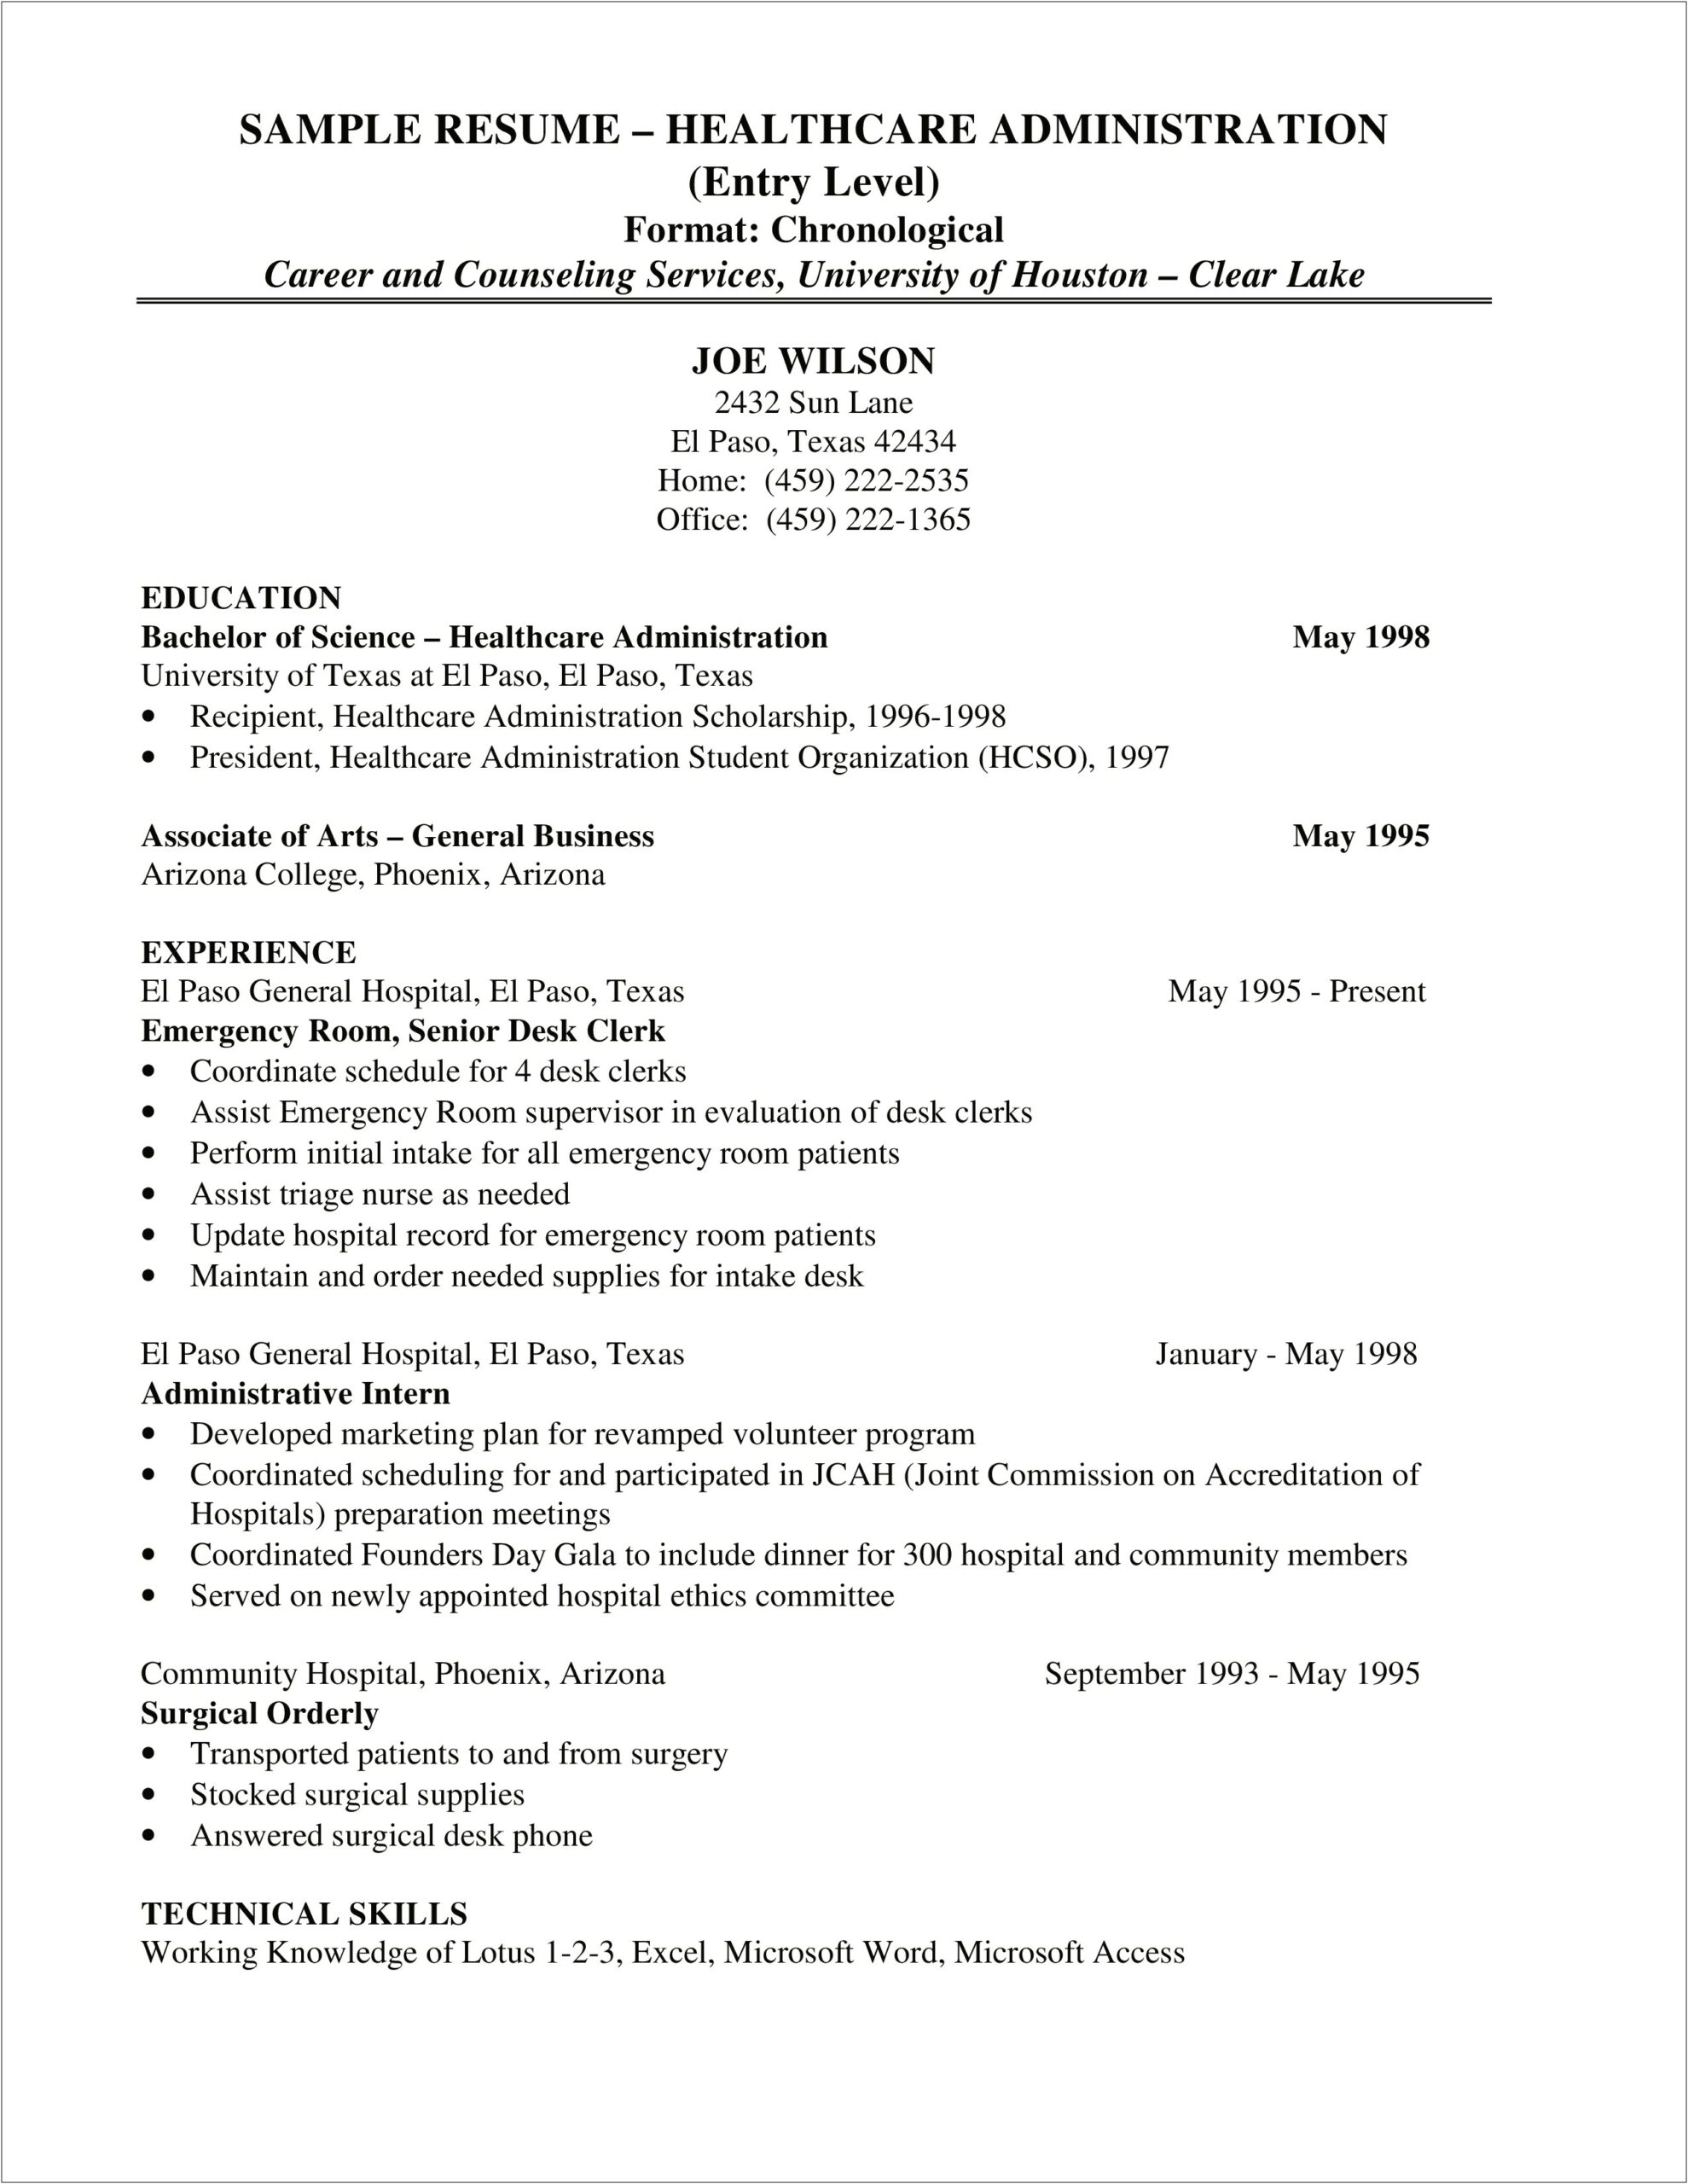 College Career Counsel Job Resume Healthcare